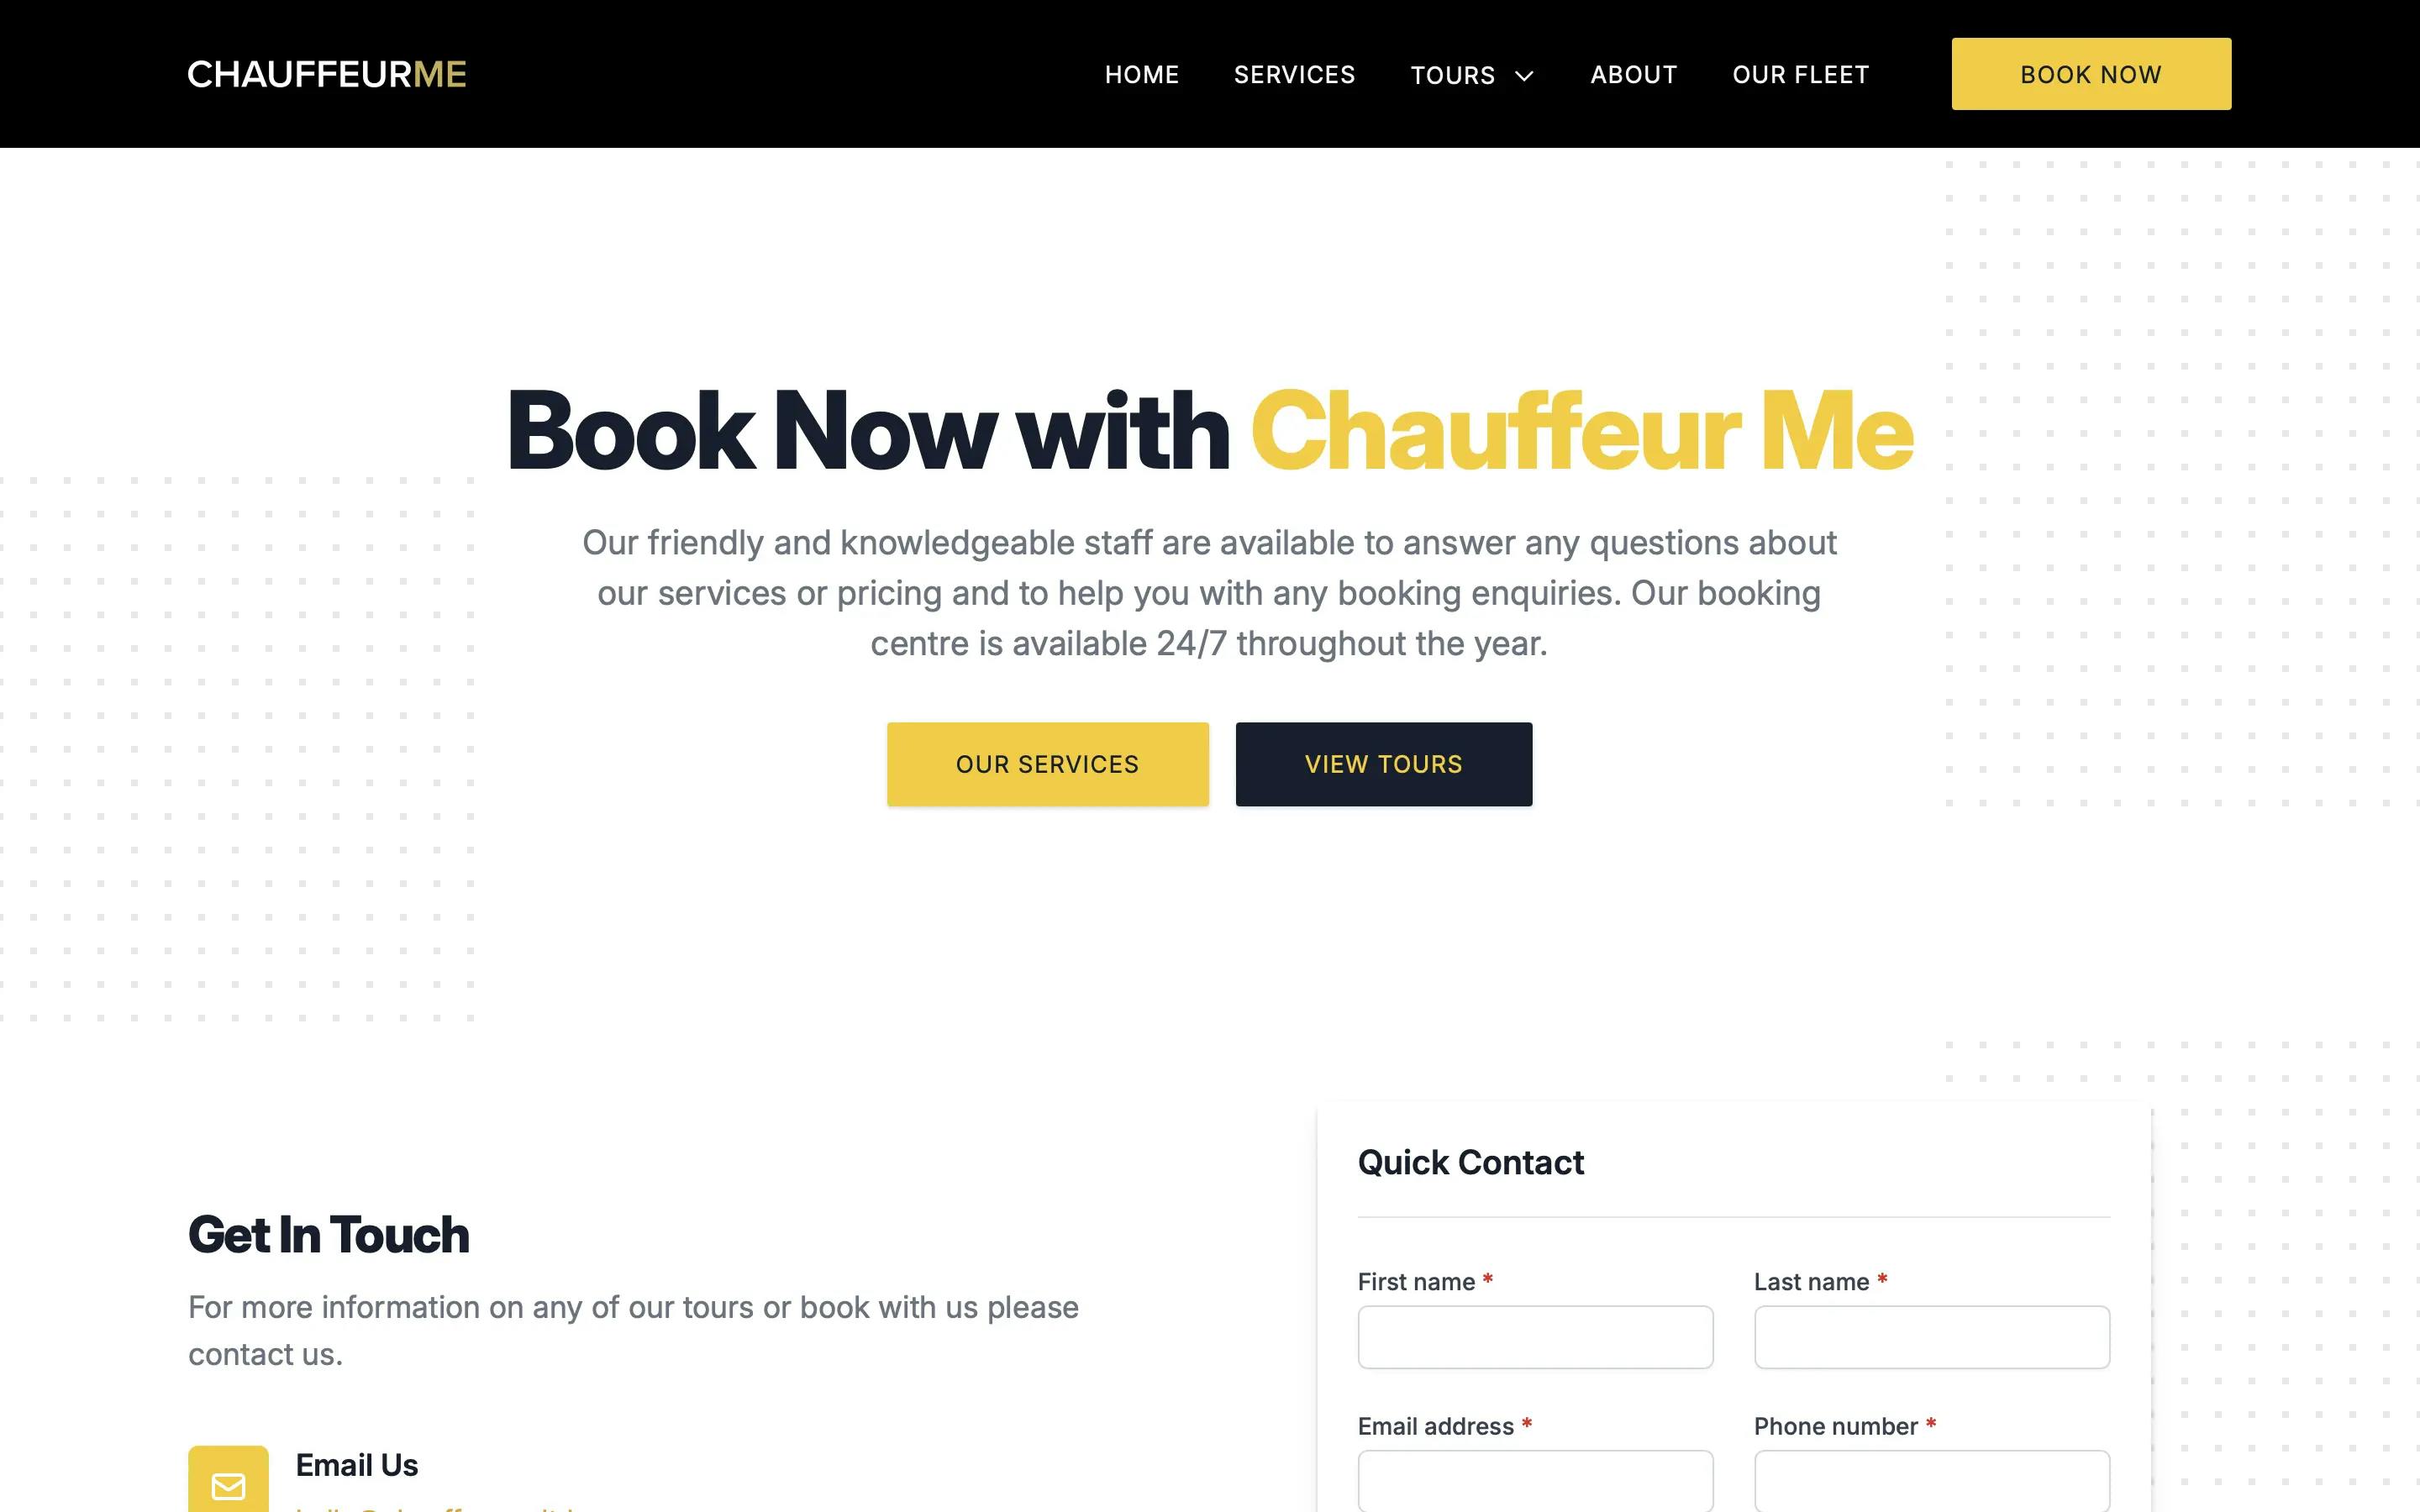 Chauffeur Me contact page on desktop